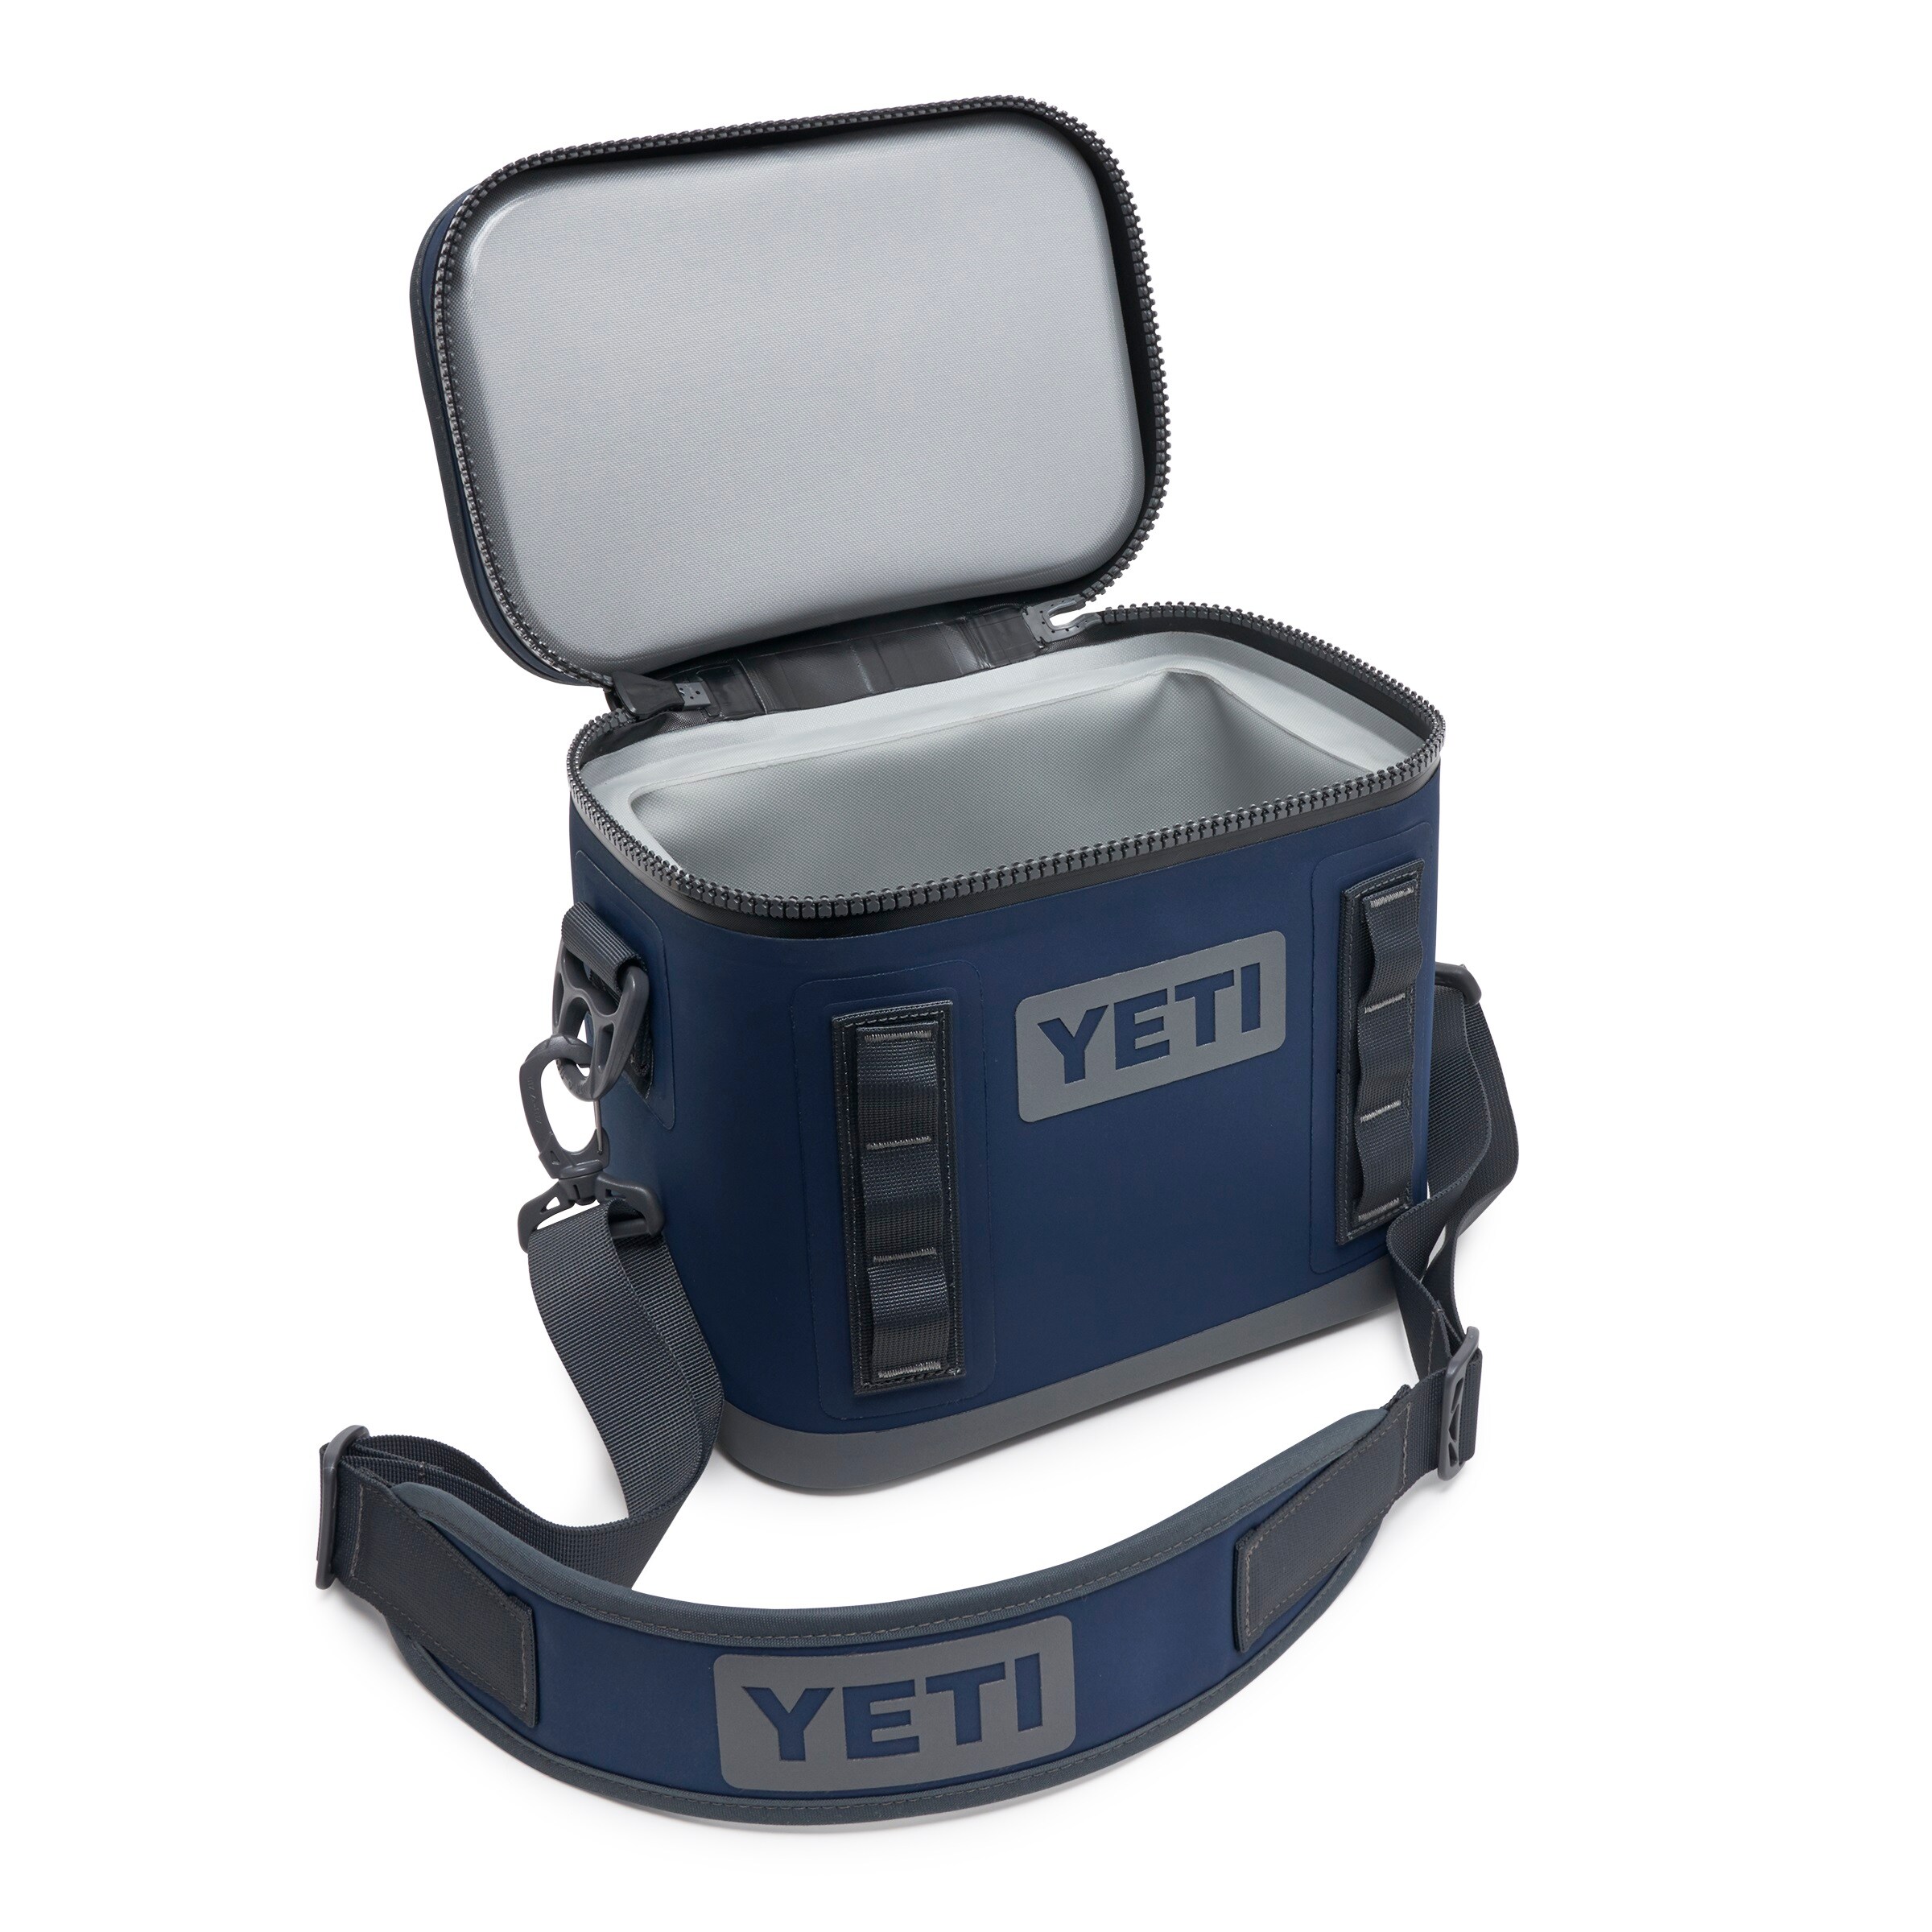 YETI Hopper Flip 8 Insulated Personal Cooler in the Portable 